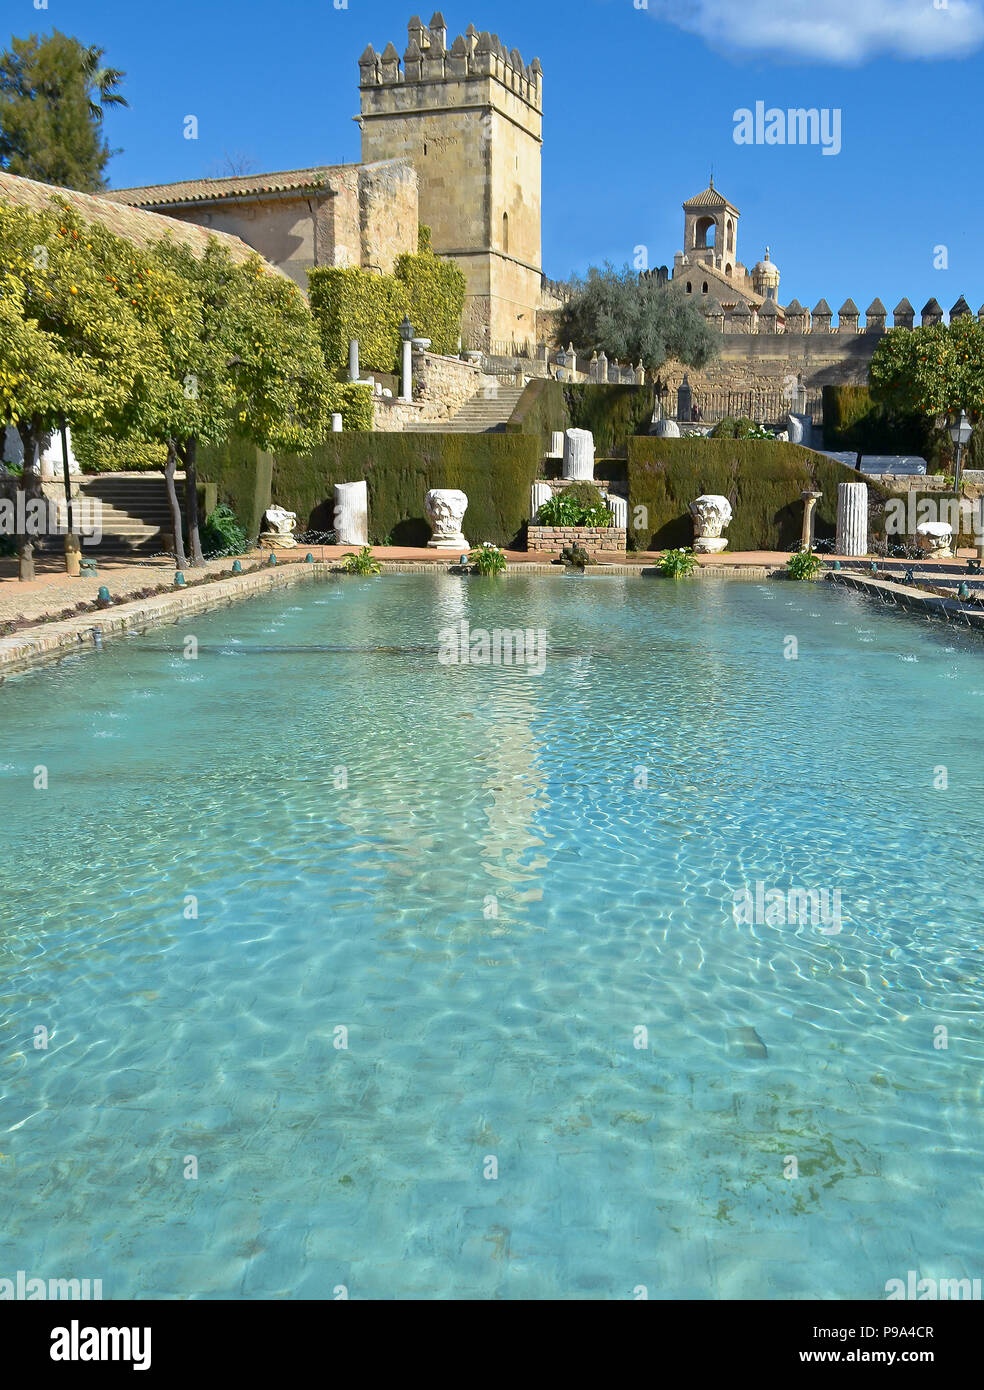 Water and architecture at the Alcázar de los Reyes Cristianos in Cordoba, Spain Stock Photo